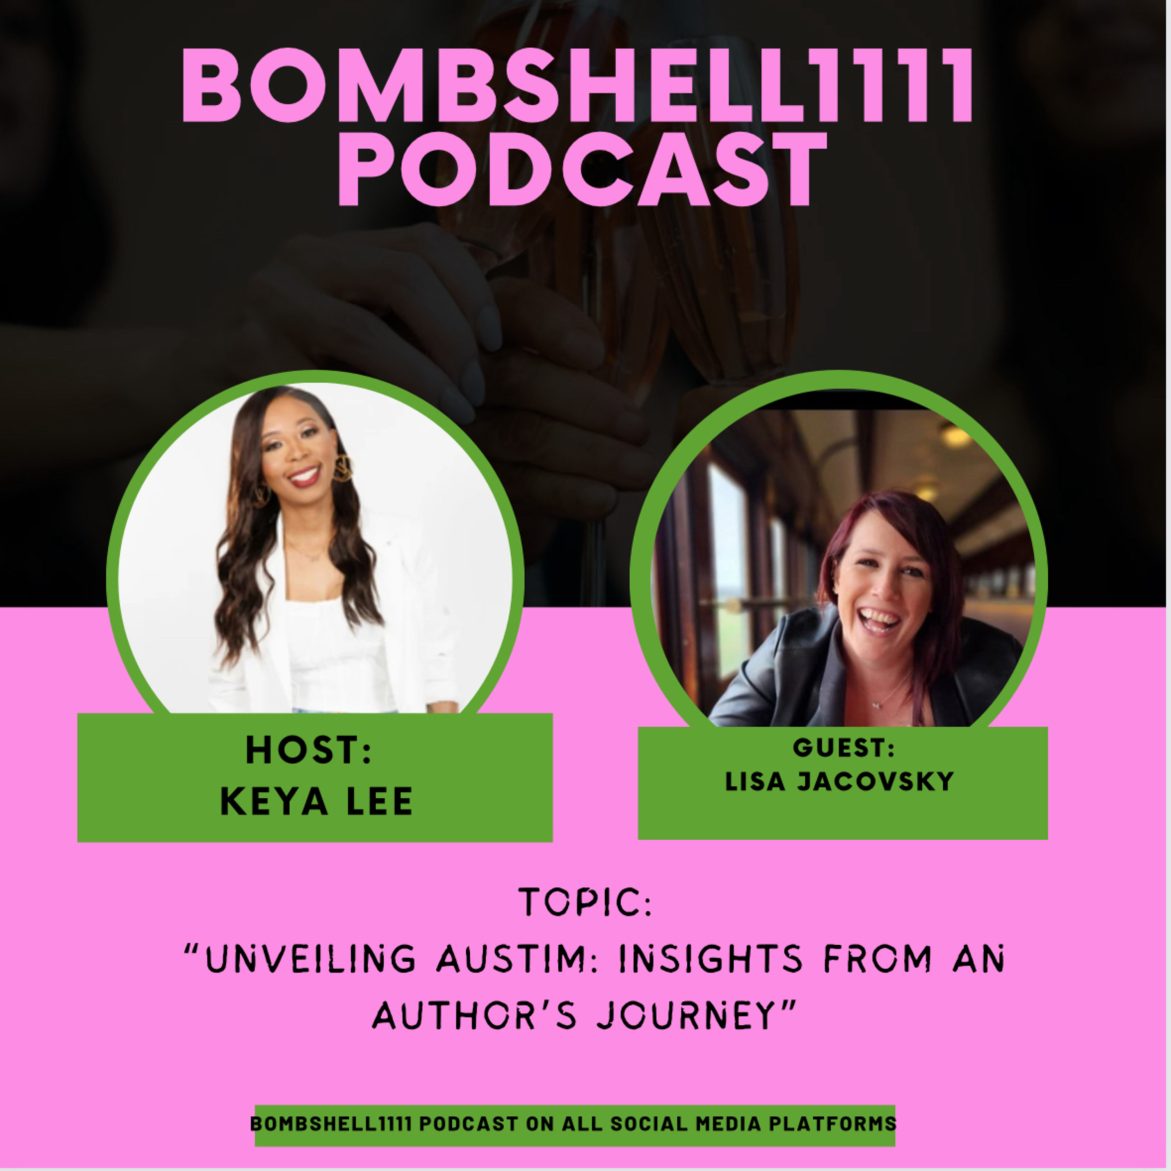 Black Podcasting - “Unveiling Autism: Insights From An Author’s Journey”